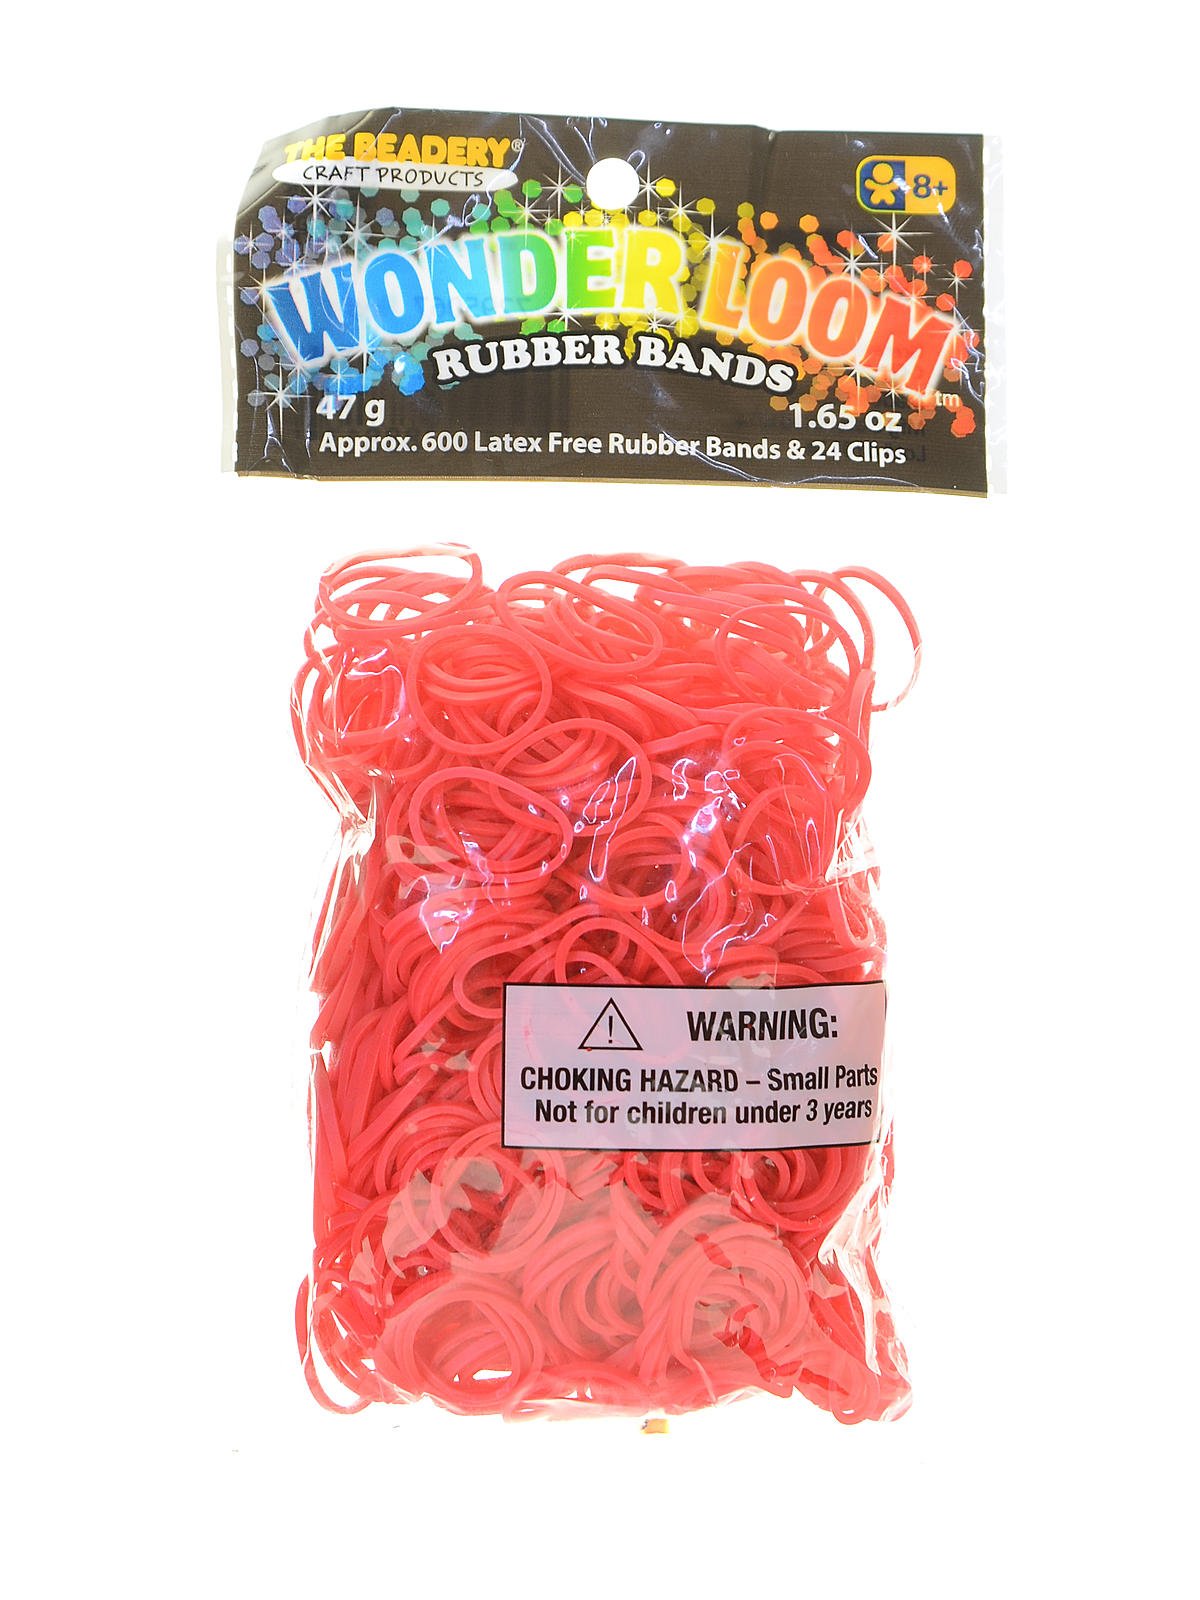 Rainbow Loom Gold Rubber Bands Refill Pack [600 Count]